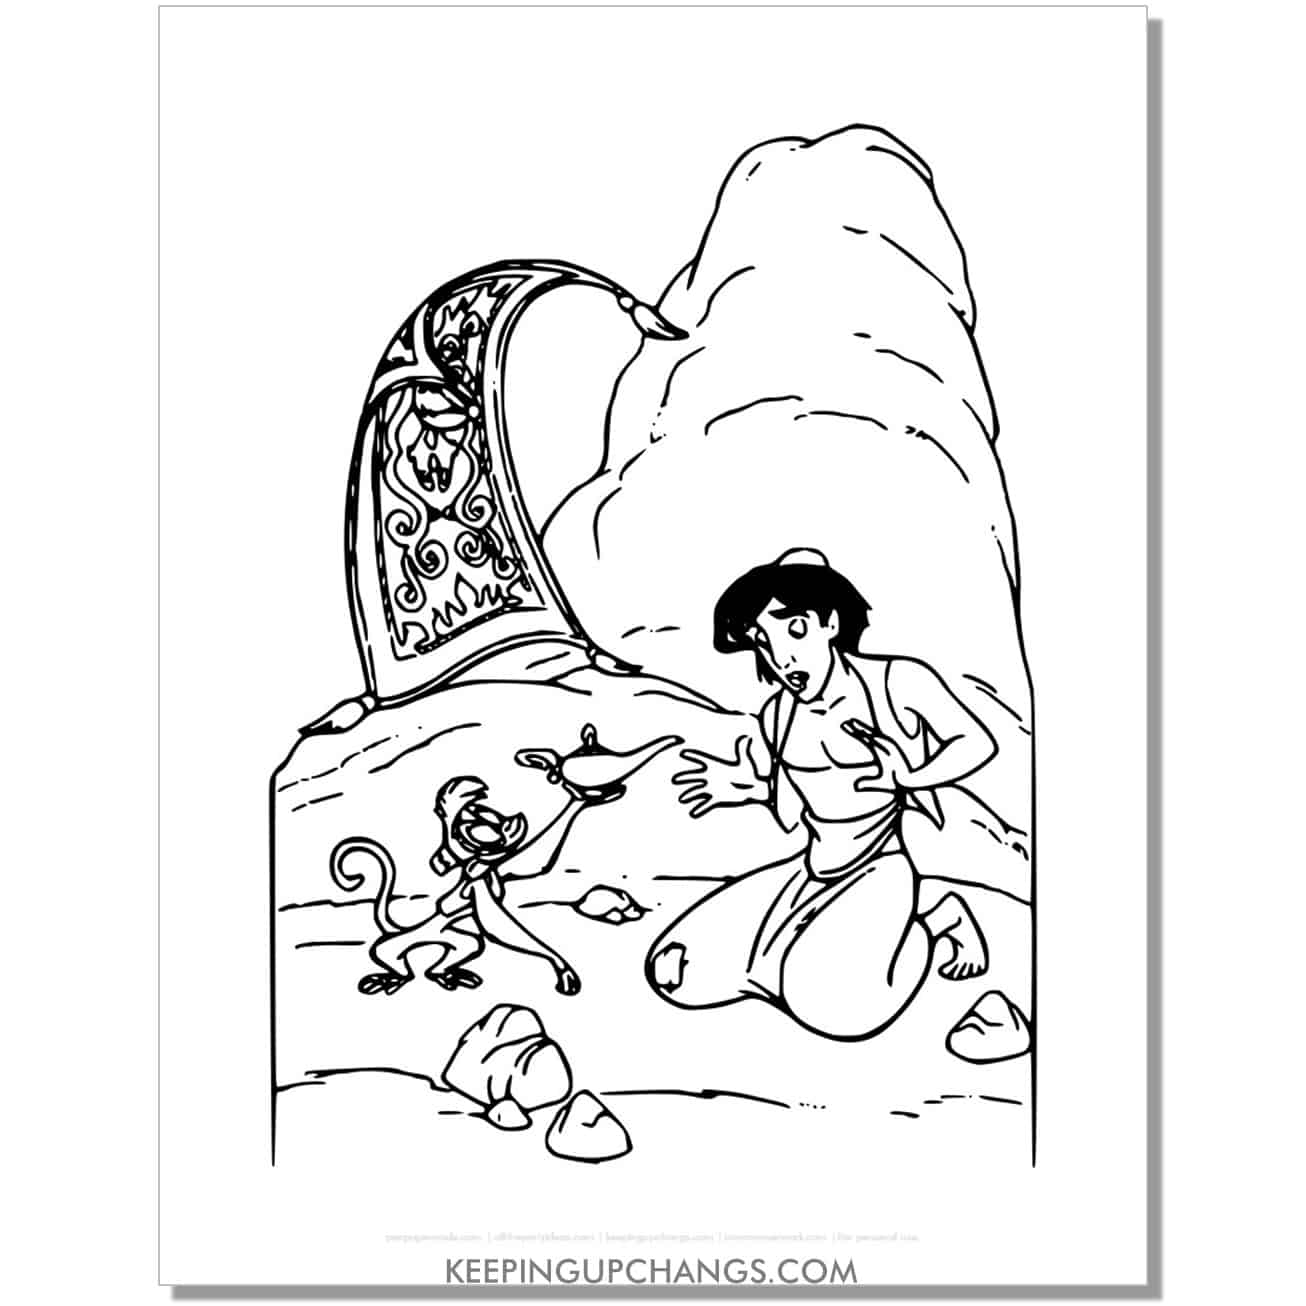 aladdin finds lamp in cave coloring page, sheet.